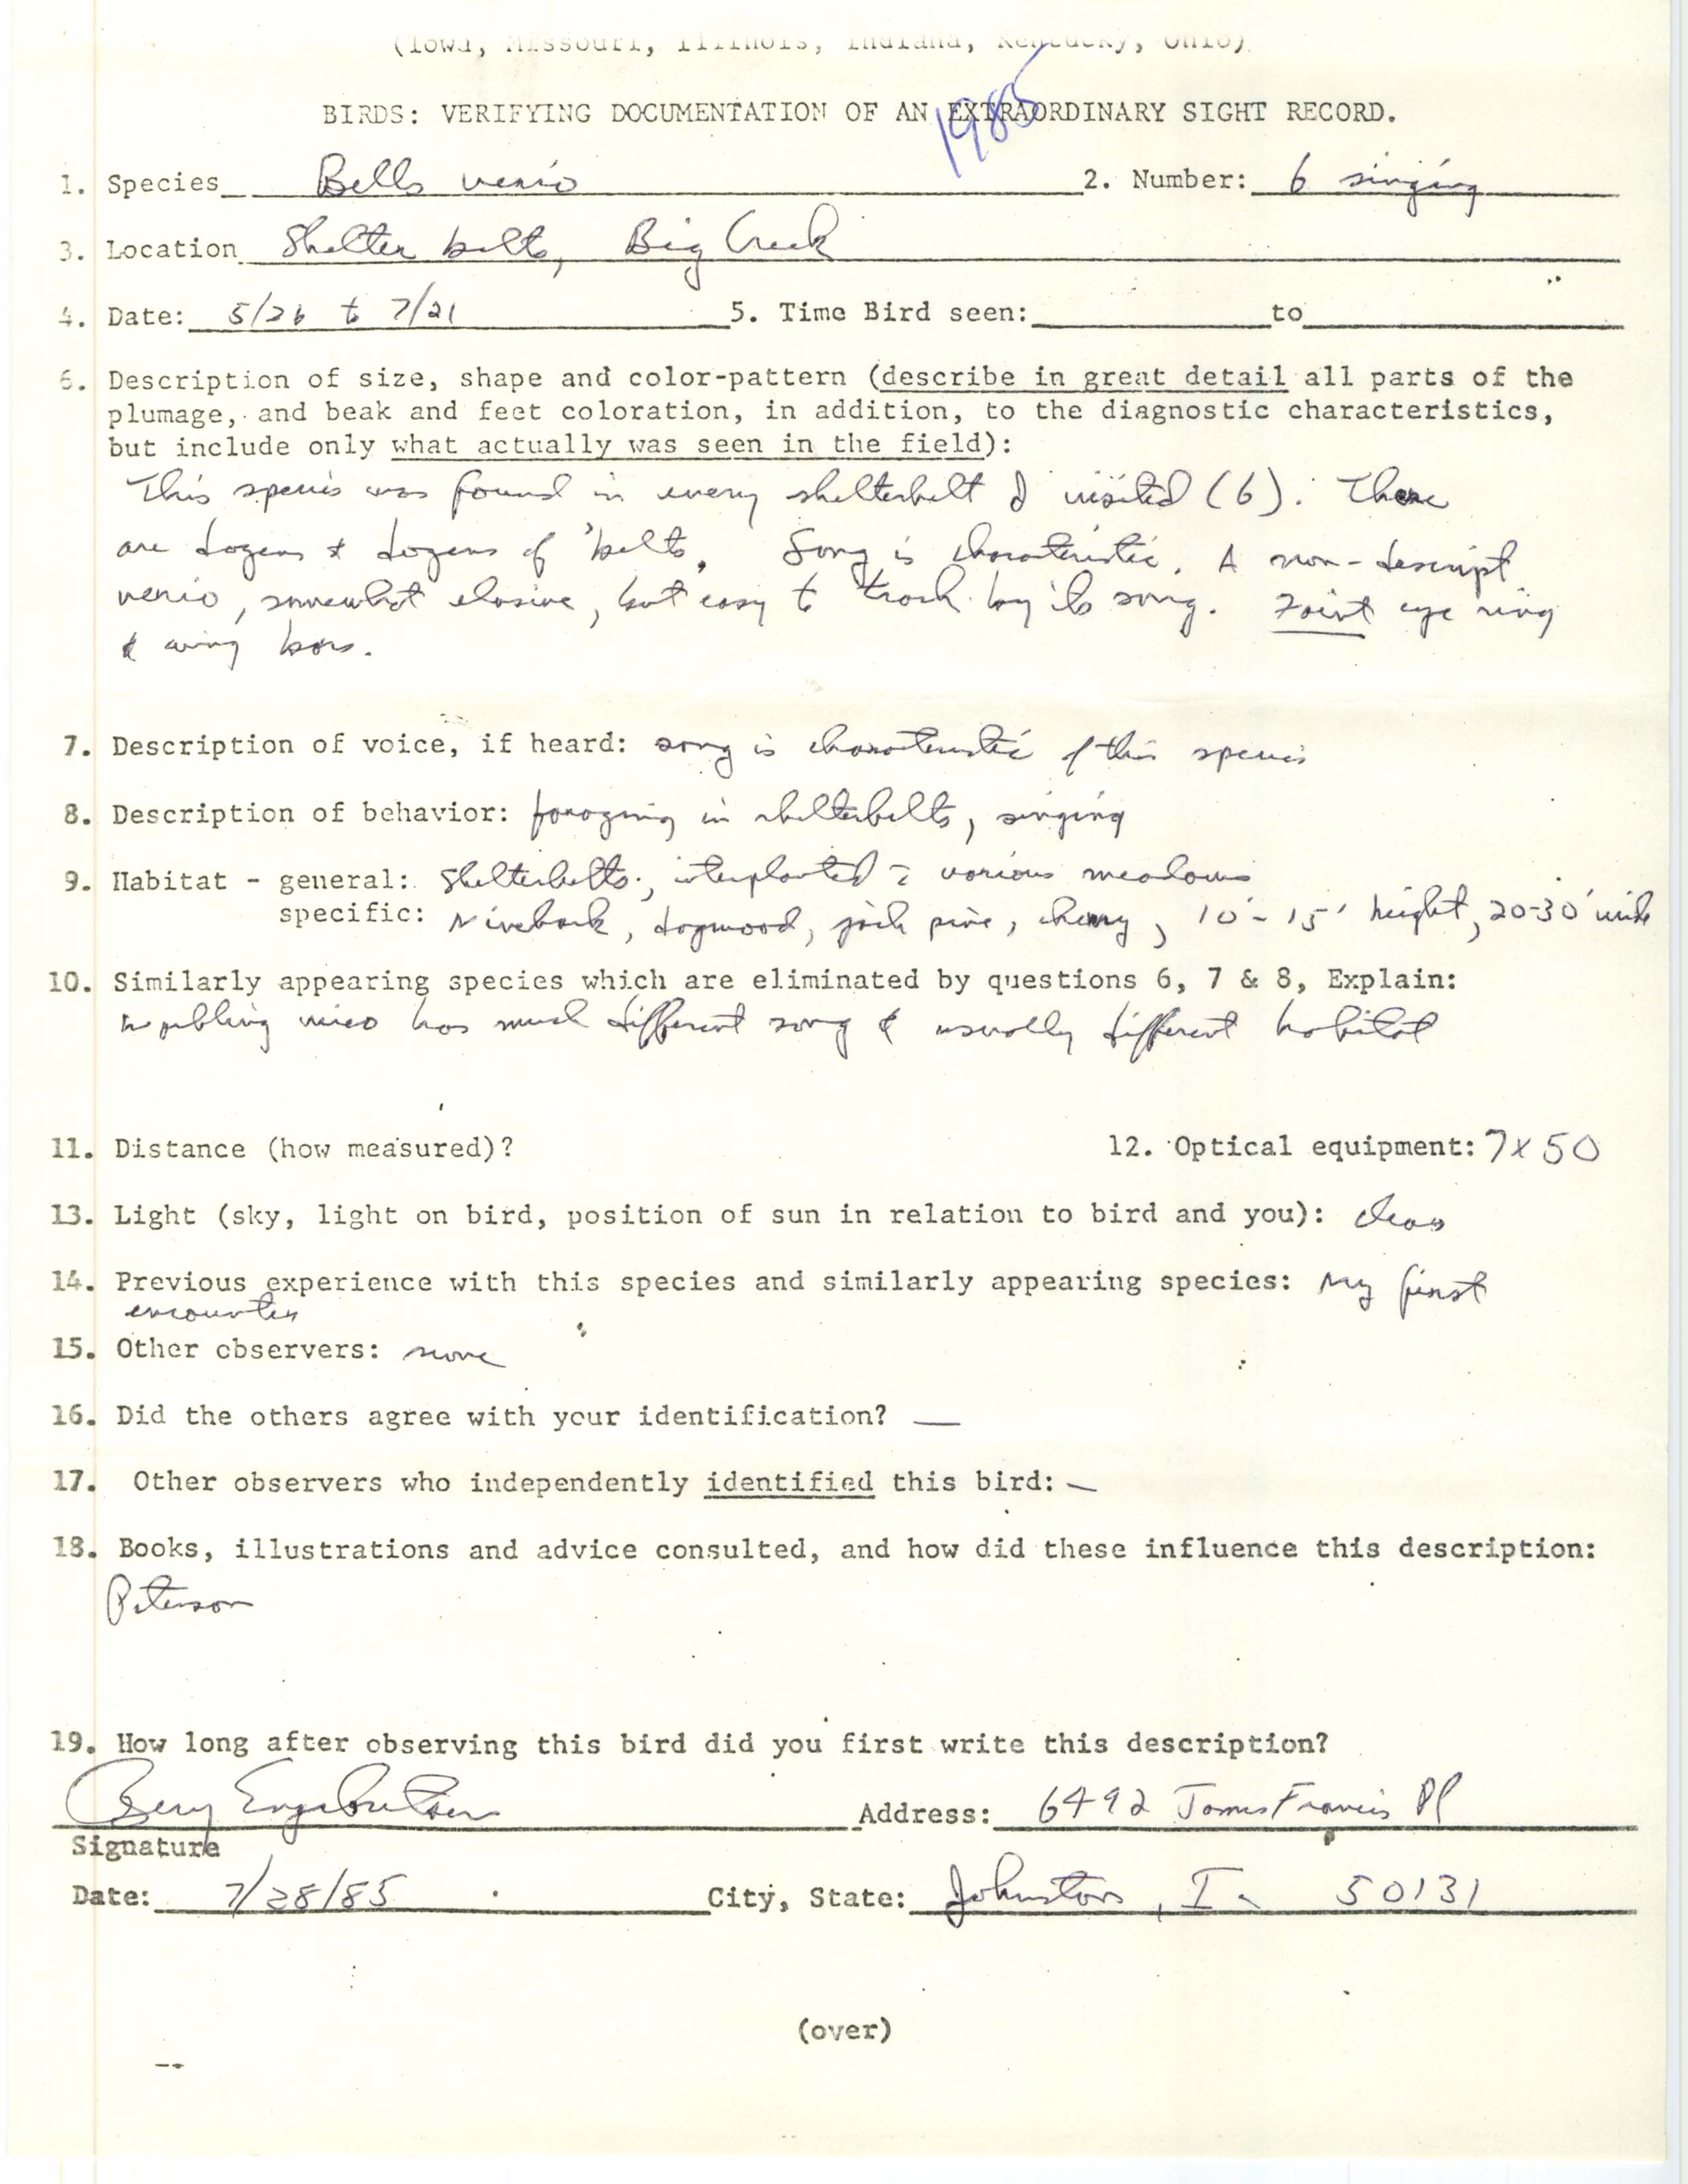 Rare bird documentation form for Bell's Vireo at Big Creek in 1985